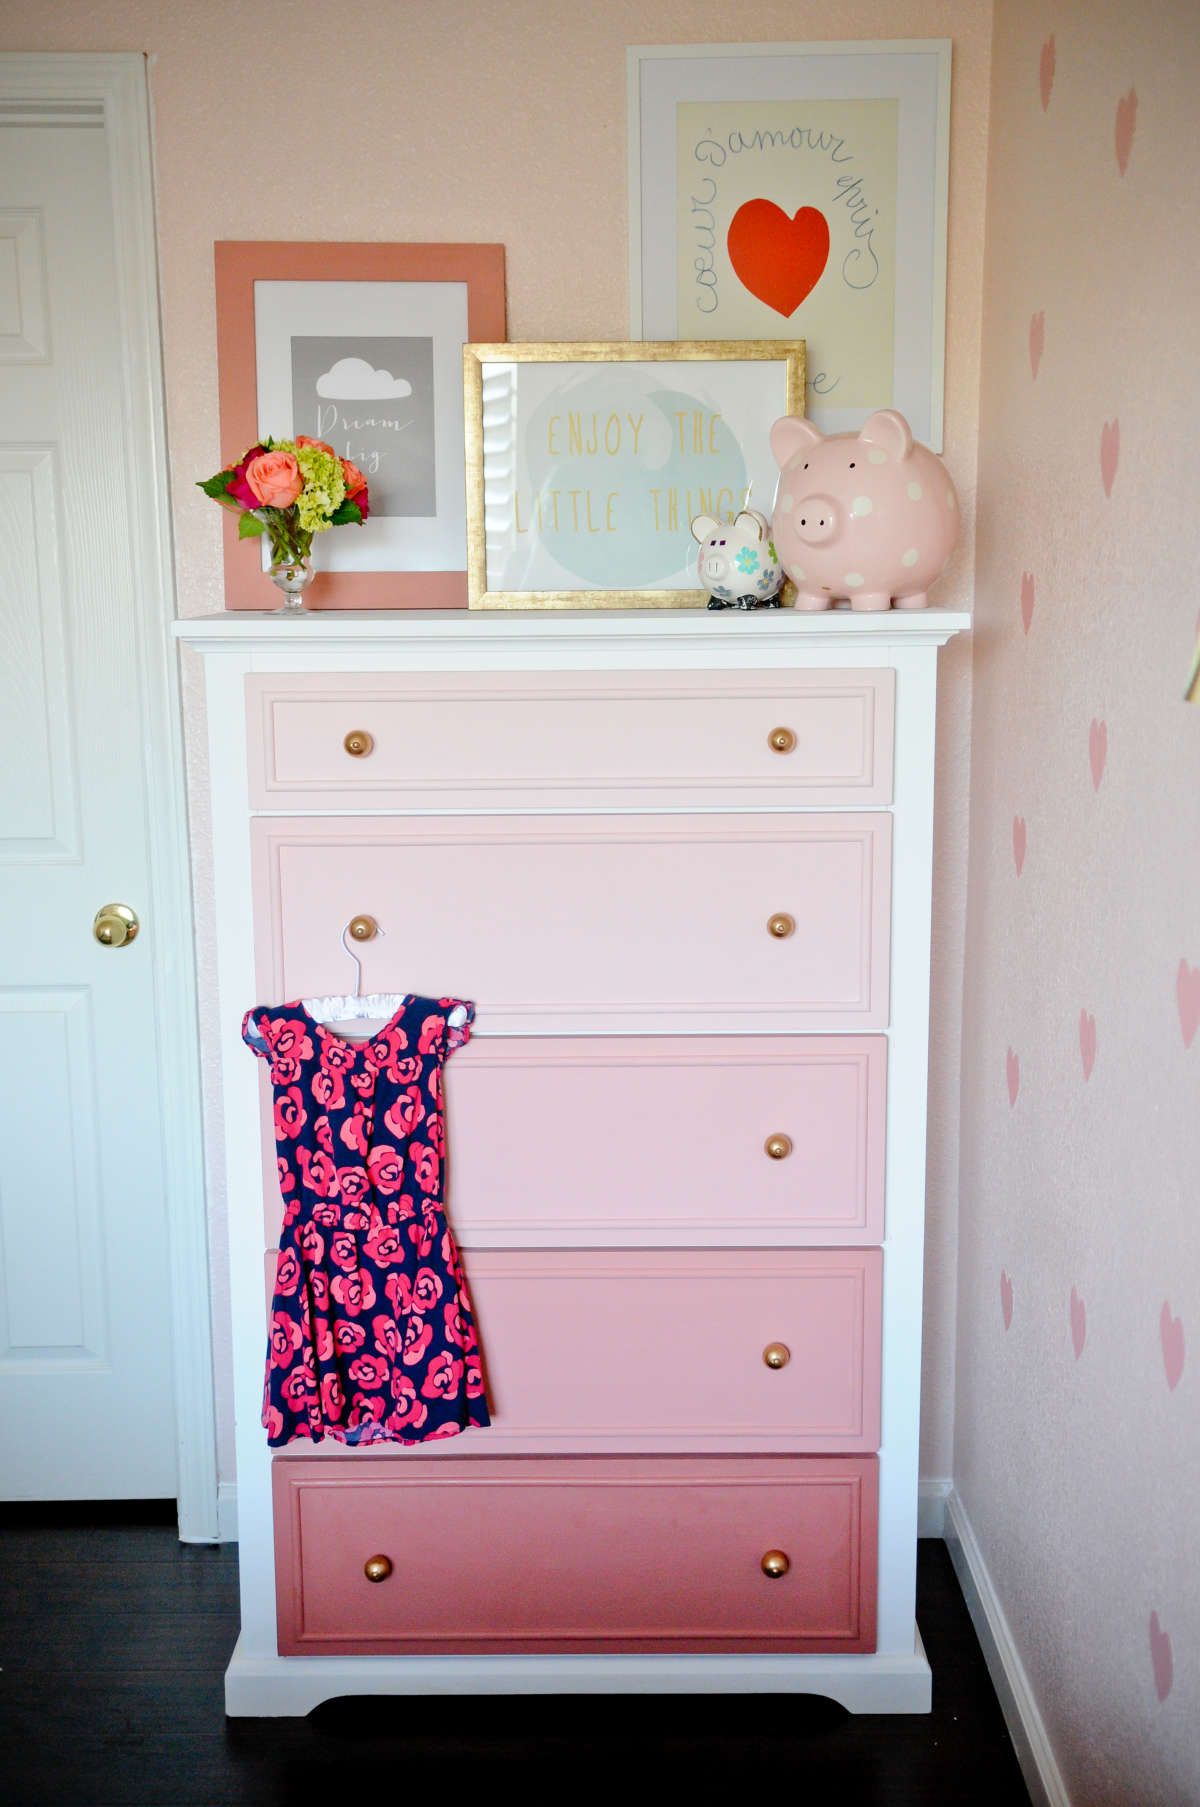 7 DIY Ideas That Will Make Your Kid’s Room the Envy of All Their Friends